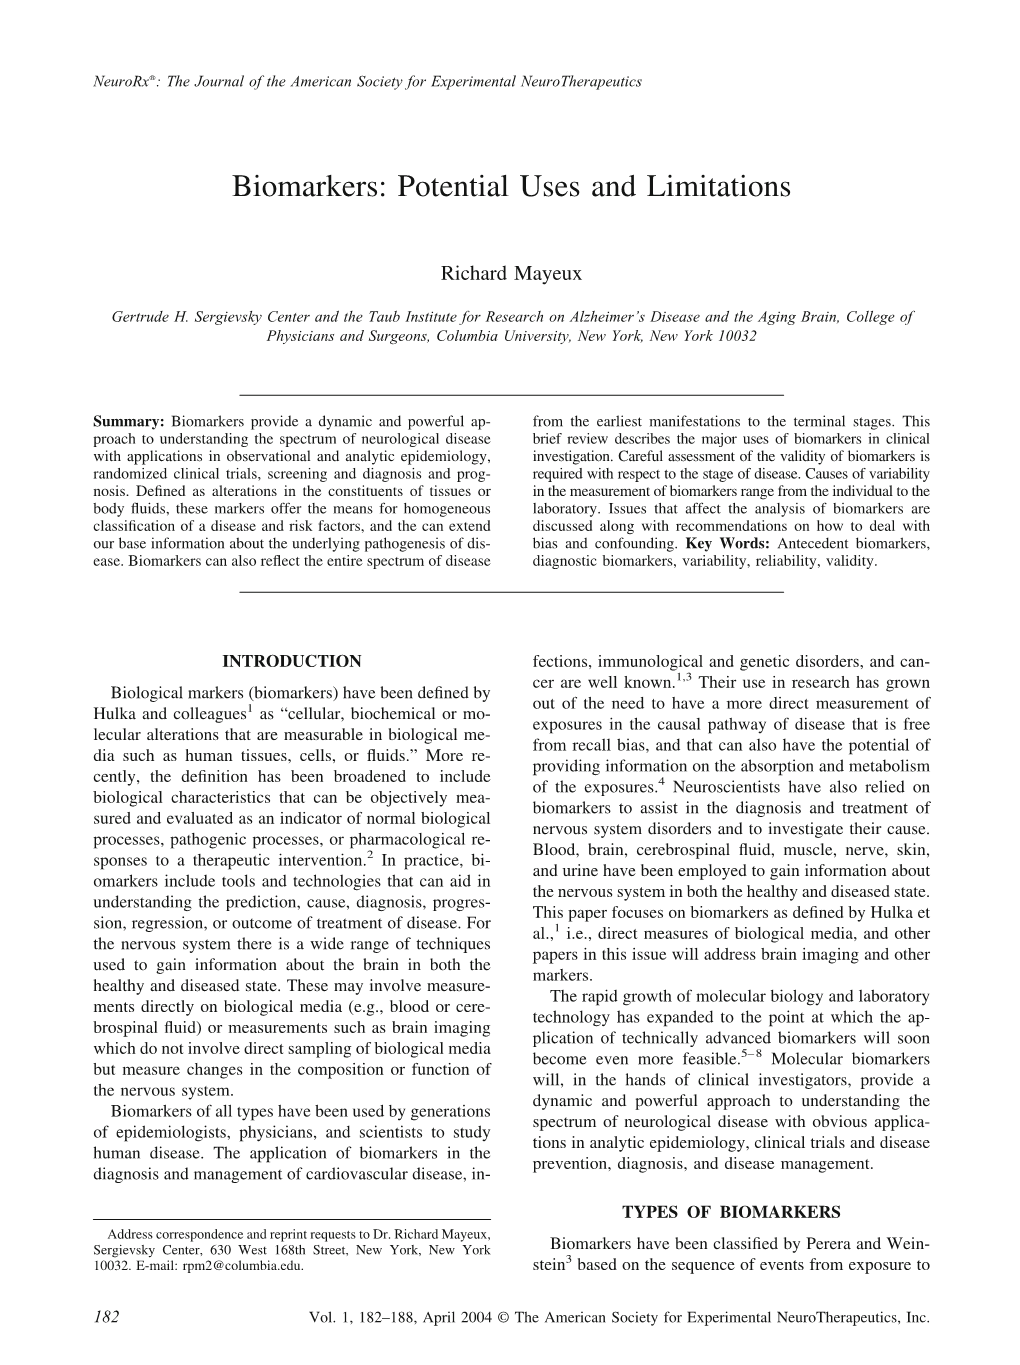 Biomarkers: Potential Uses and Limitations